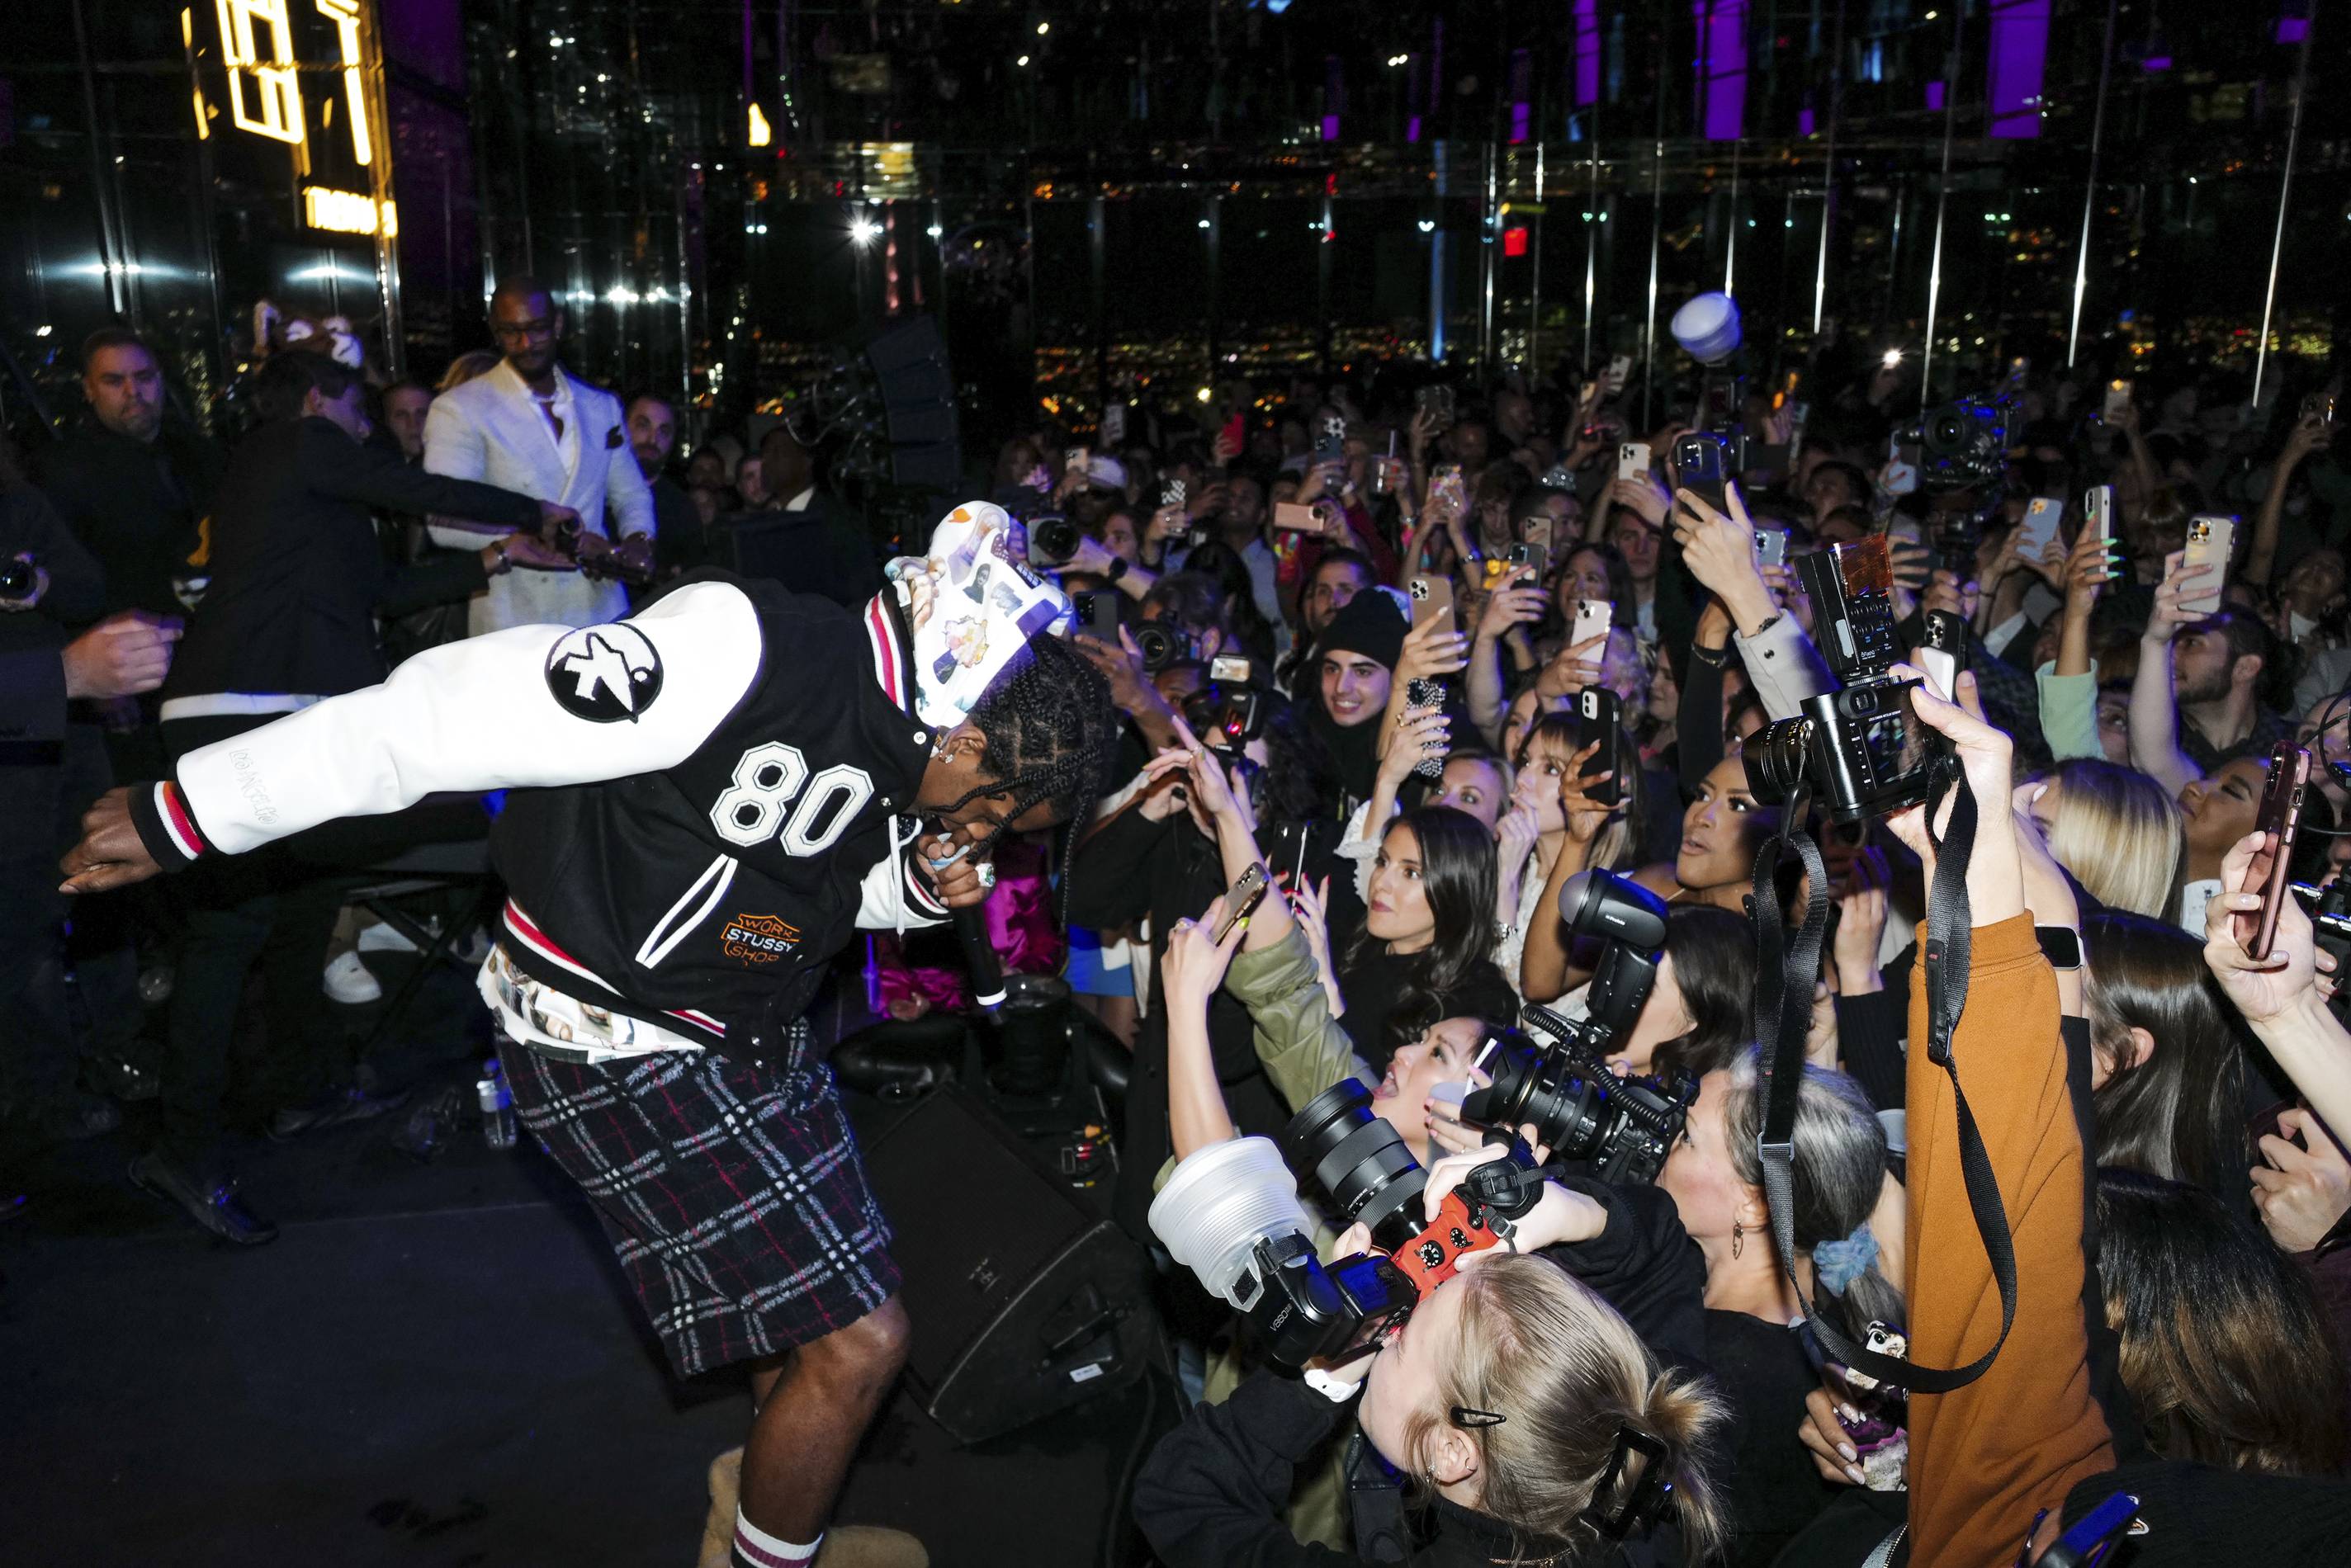 A$AP Rocky performing at the Bilt launch party in NYC